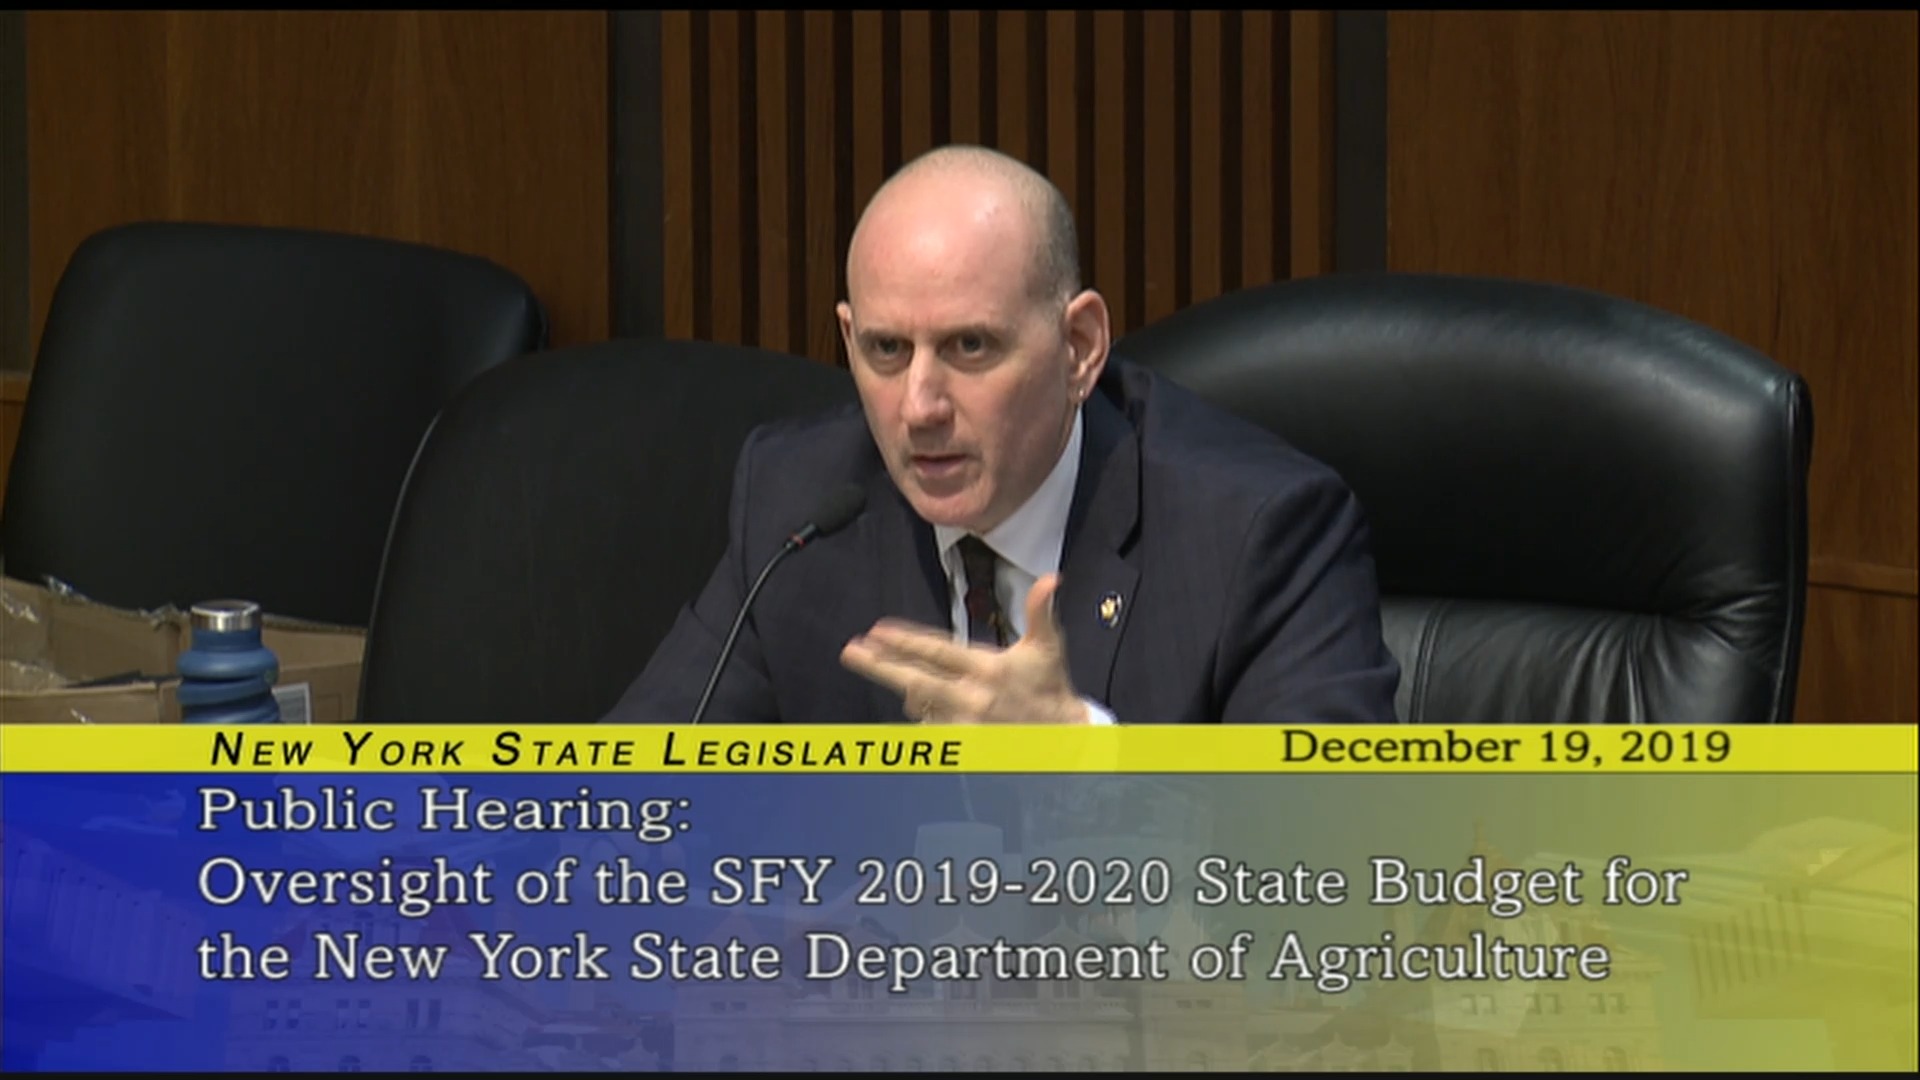 Public Hearing On New York State Department of Agriculture and Markets 2019-2020 State Budget (2)